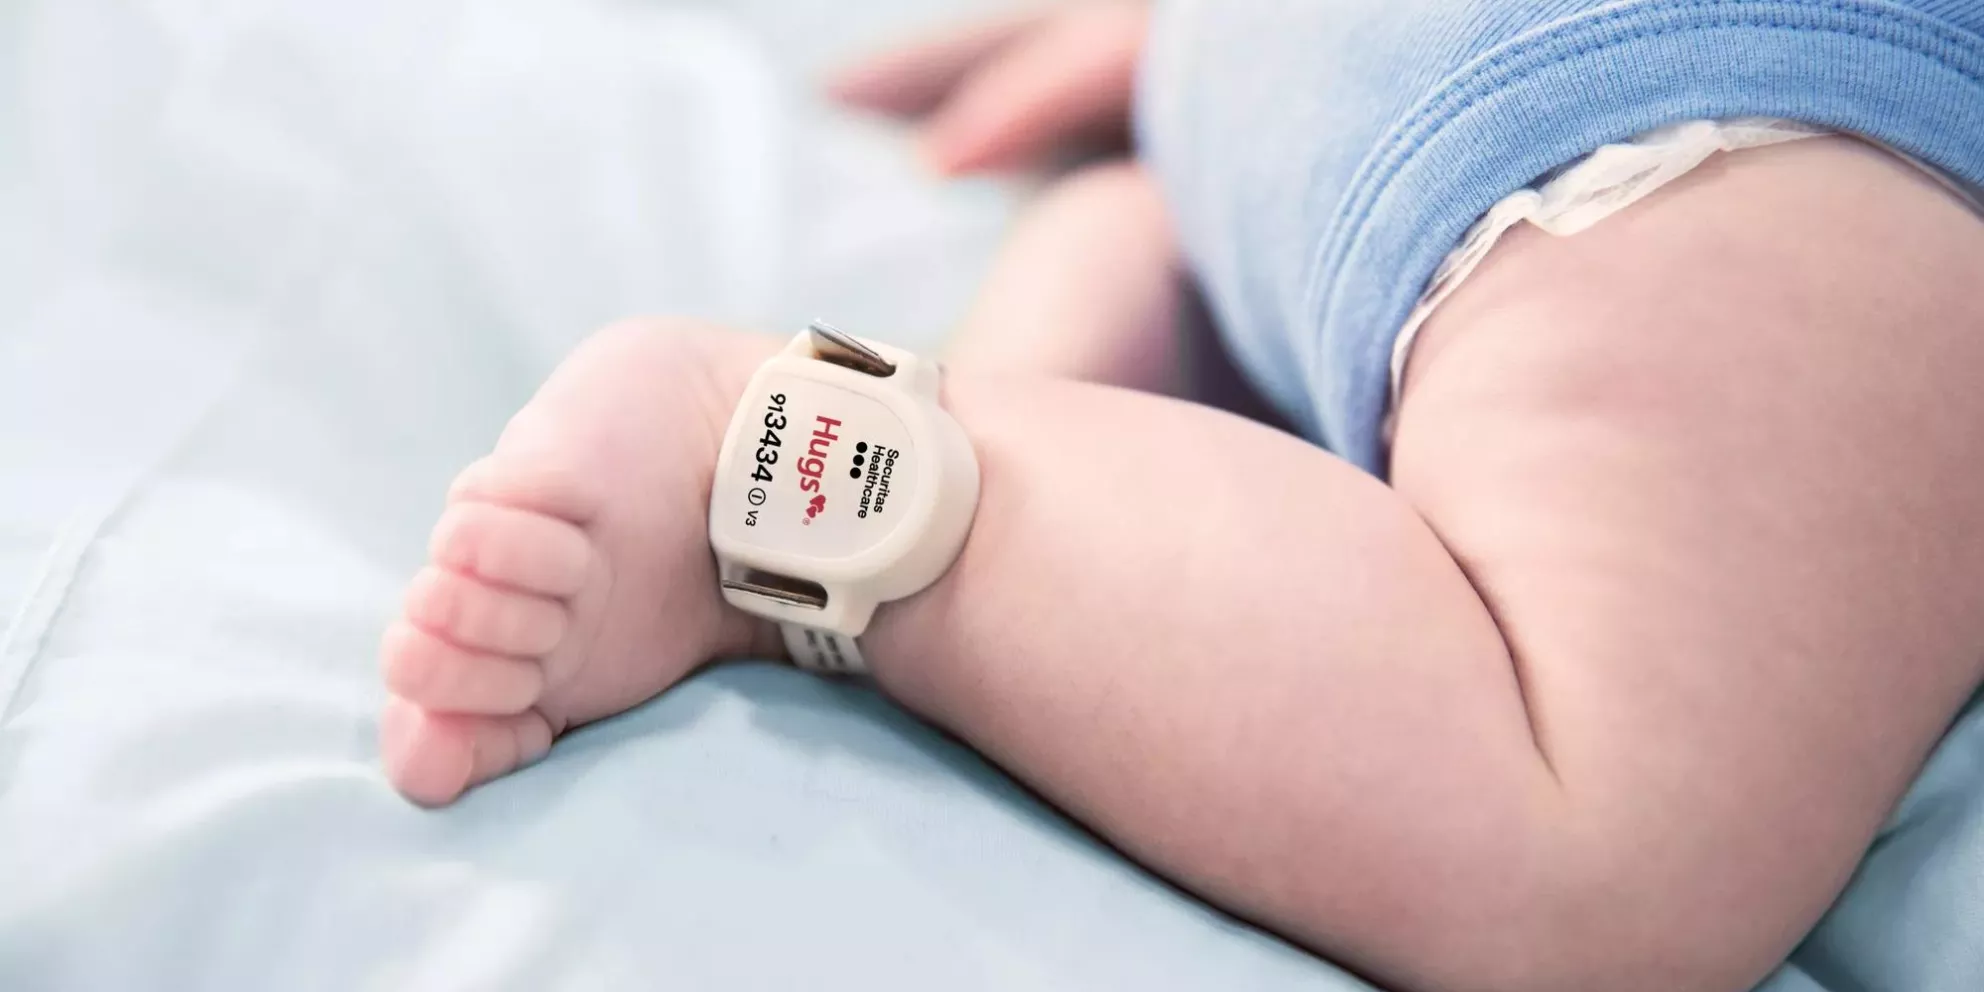 Securitas Healthcare Hugs infant protection tag attached to baby's ankle